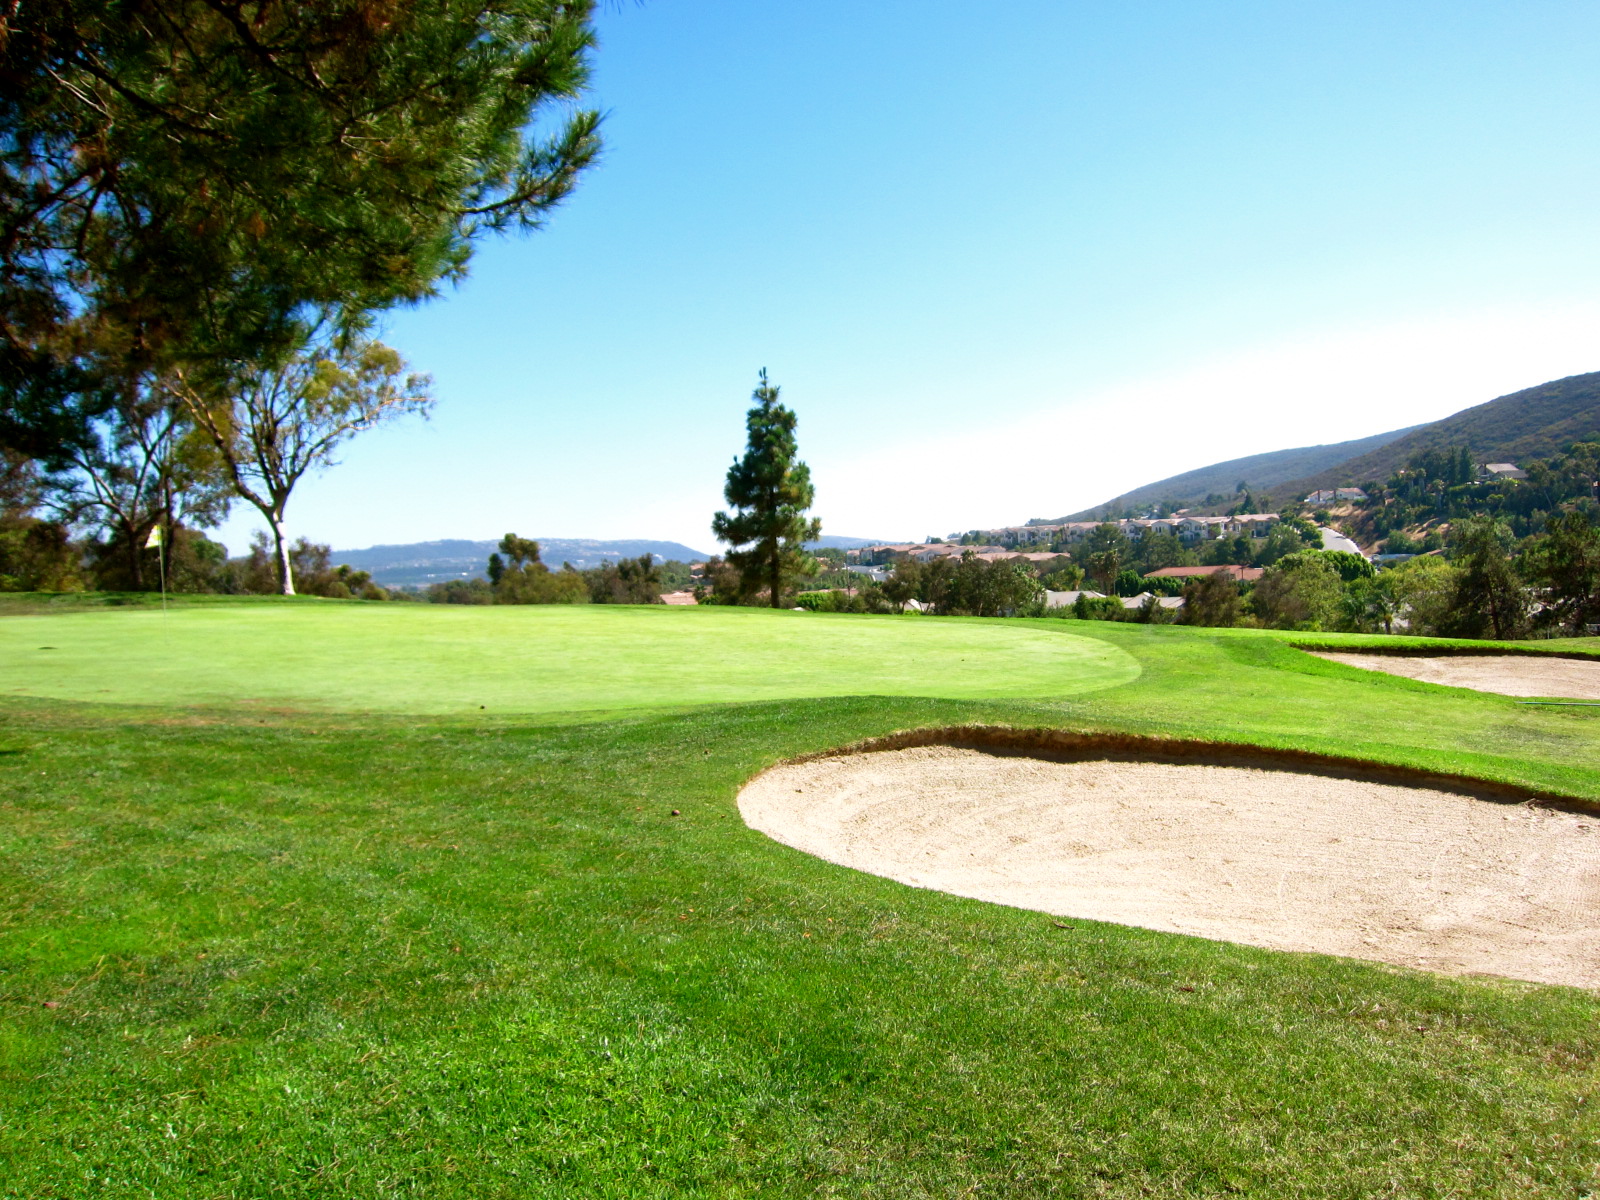 Free Golf Tournament Event training at San Diego Golf Course: Join us on the Golf Course for